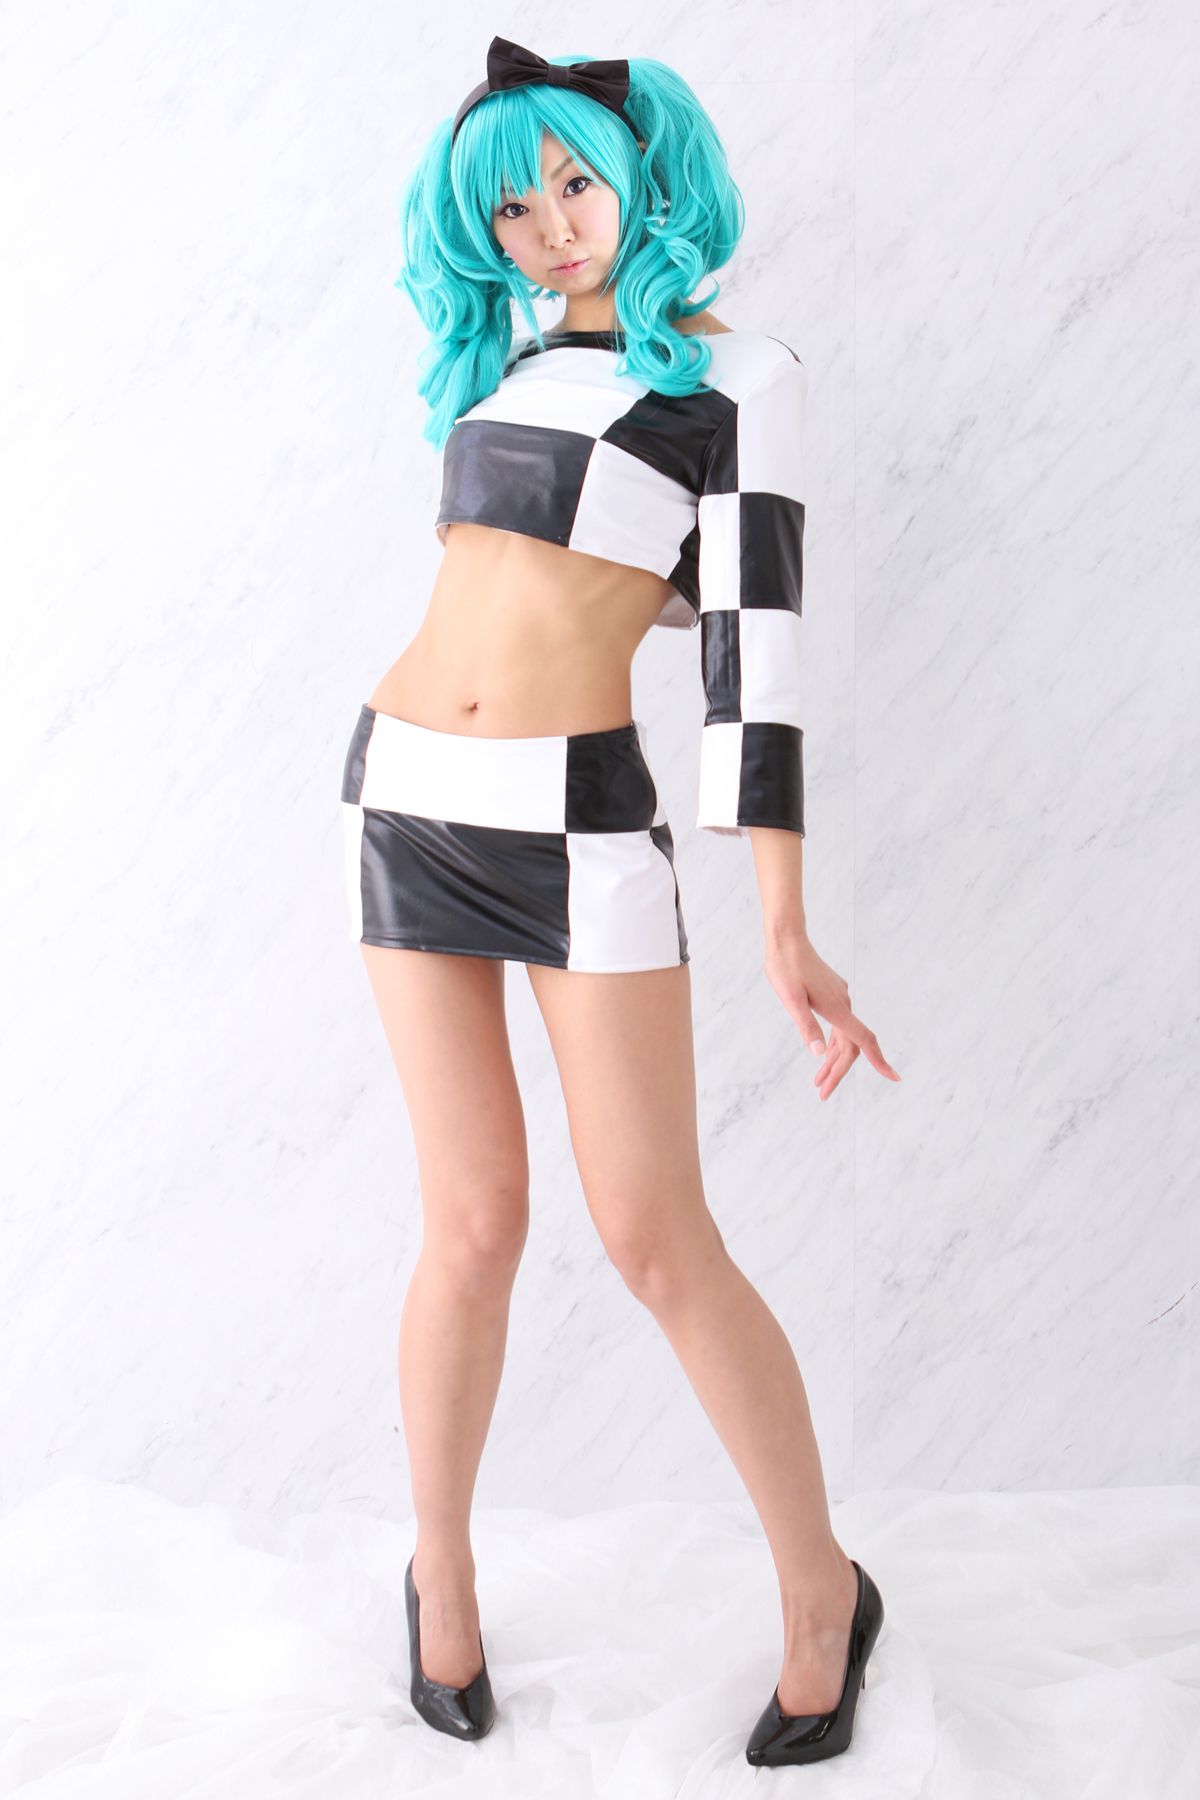 [Cosplay套图] New Hatsune Miku from Vocaloid - So Sexy[200P]